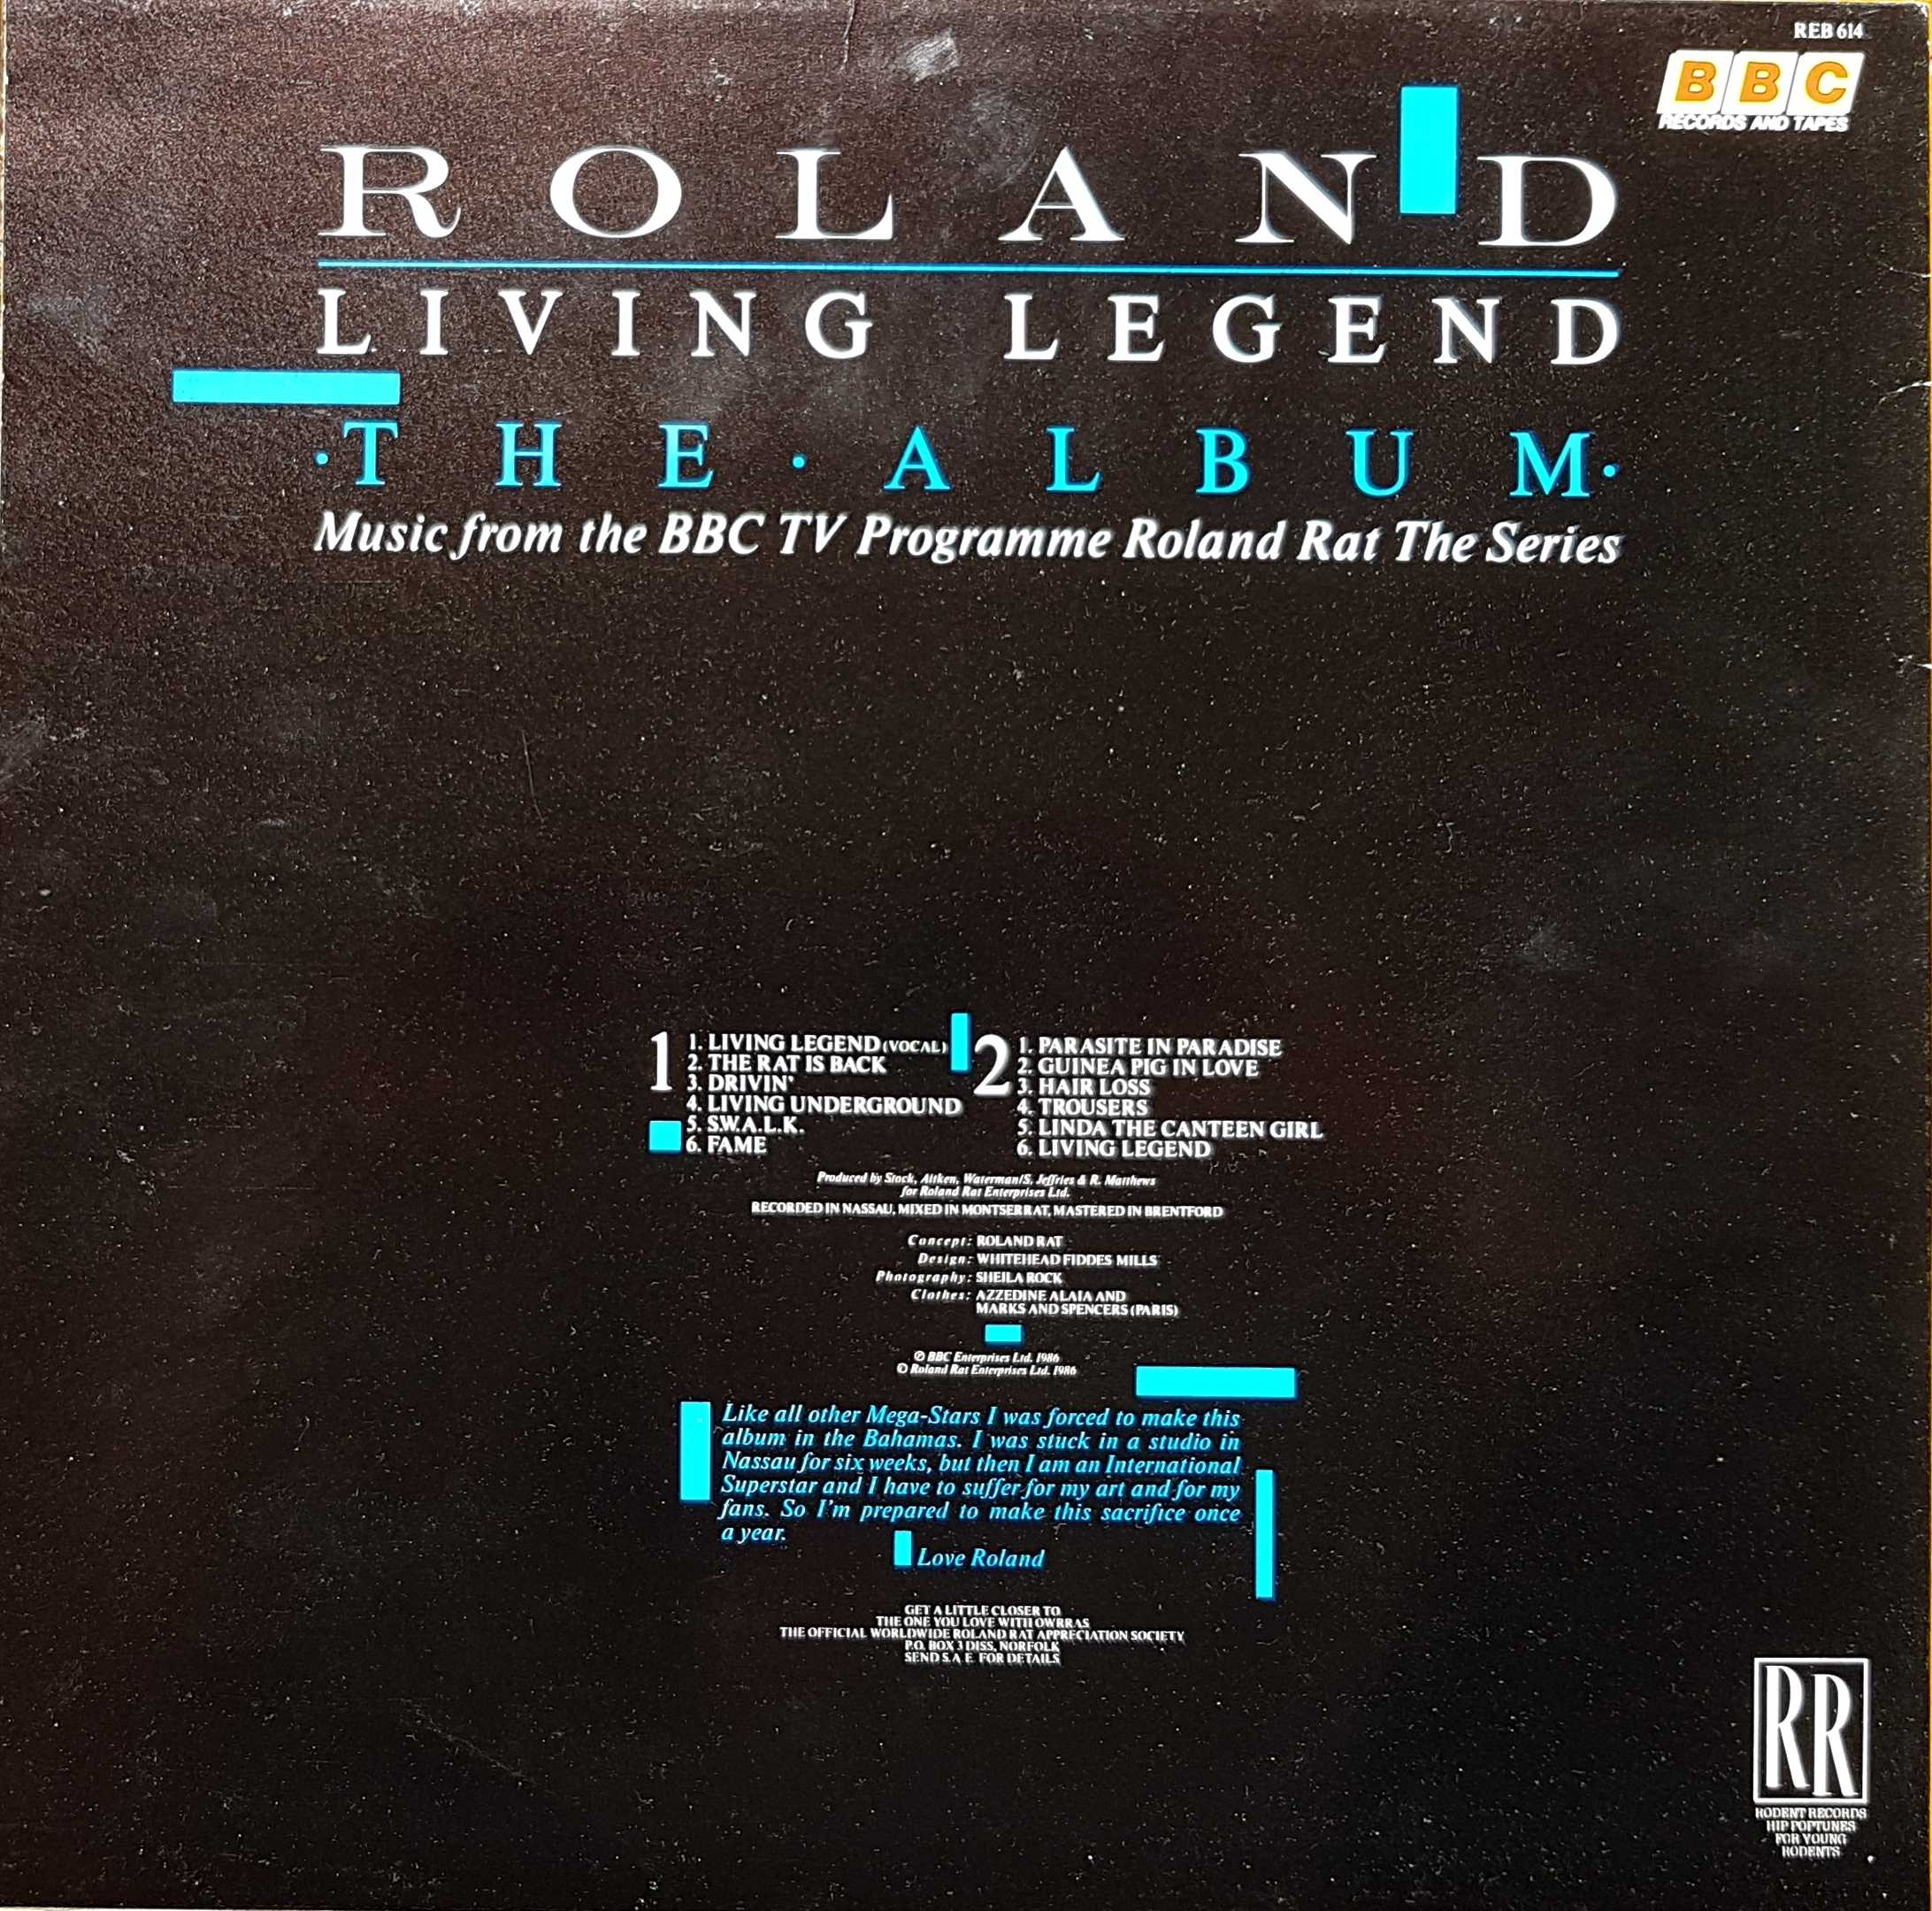 Picture of REB 614 Living legend - Roland Rat by artist Stock / Aitken / Waterman from the BBC records and Tapes library